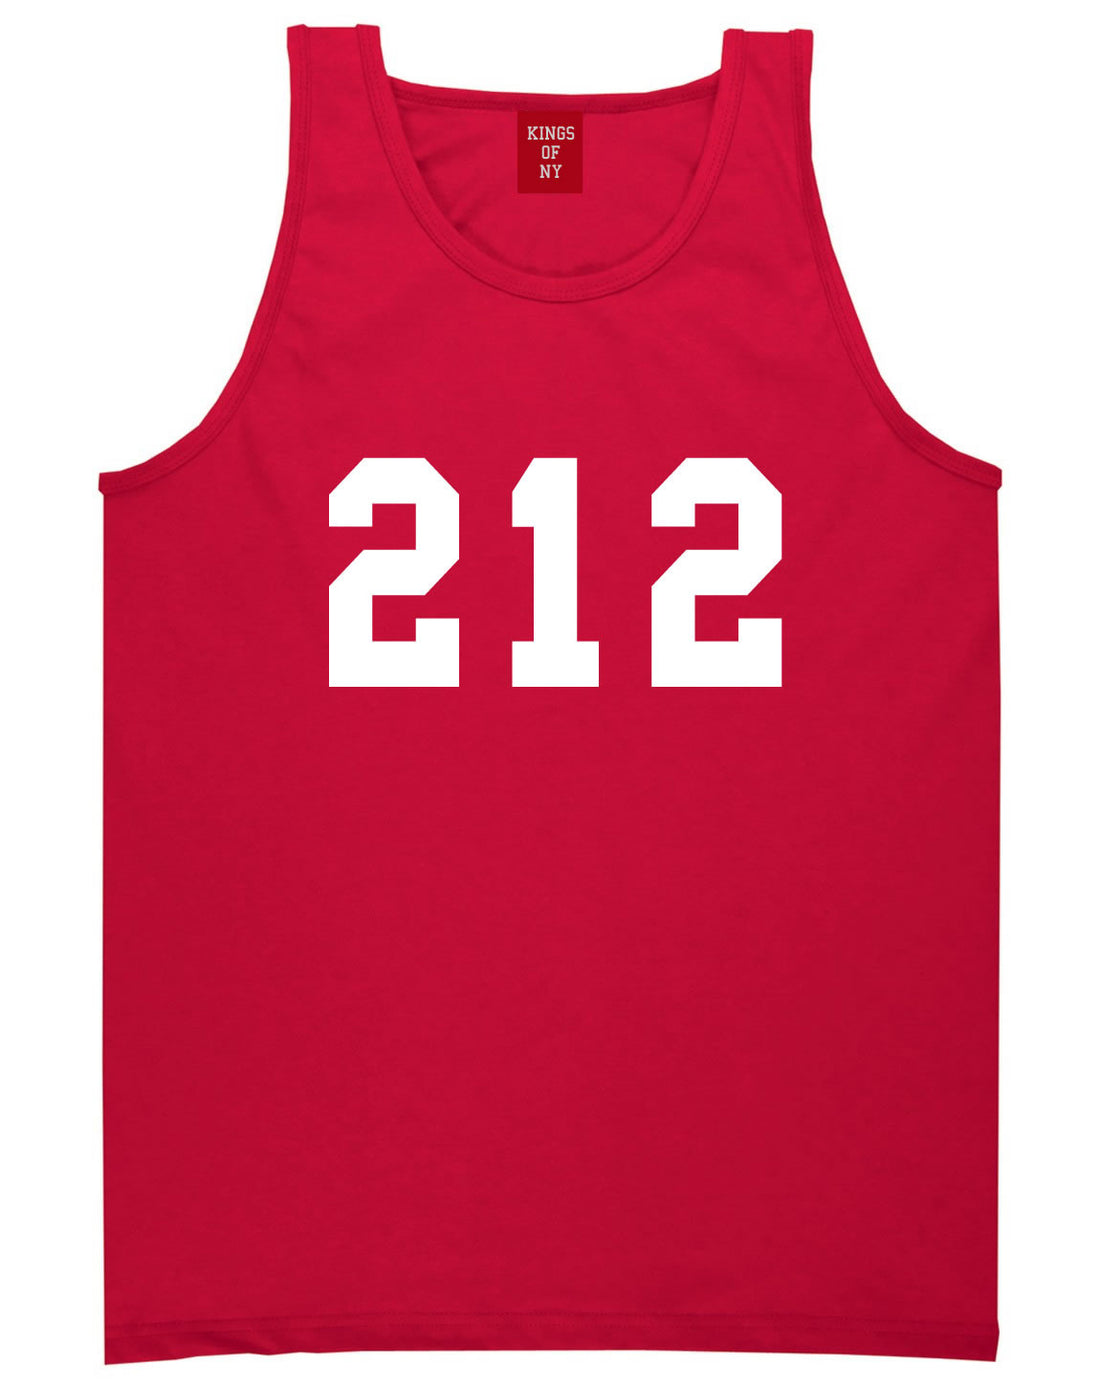 212 New York Area Code Tank Top in Red By Kings Of NY